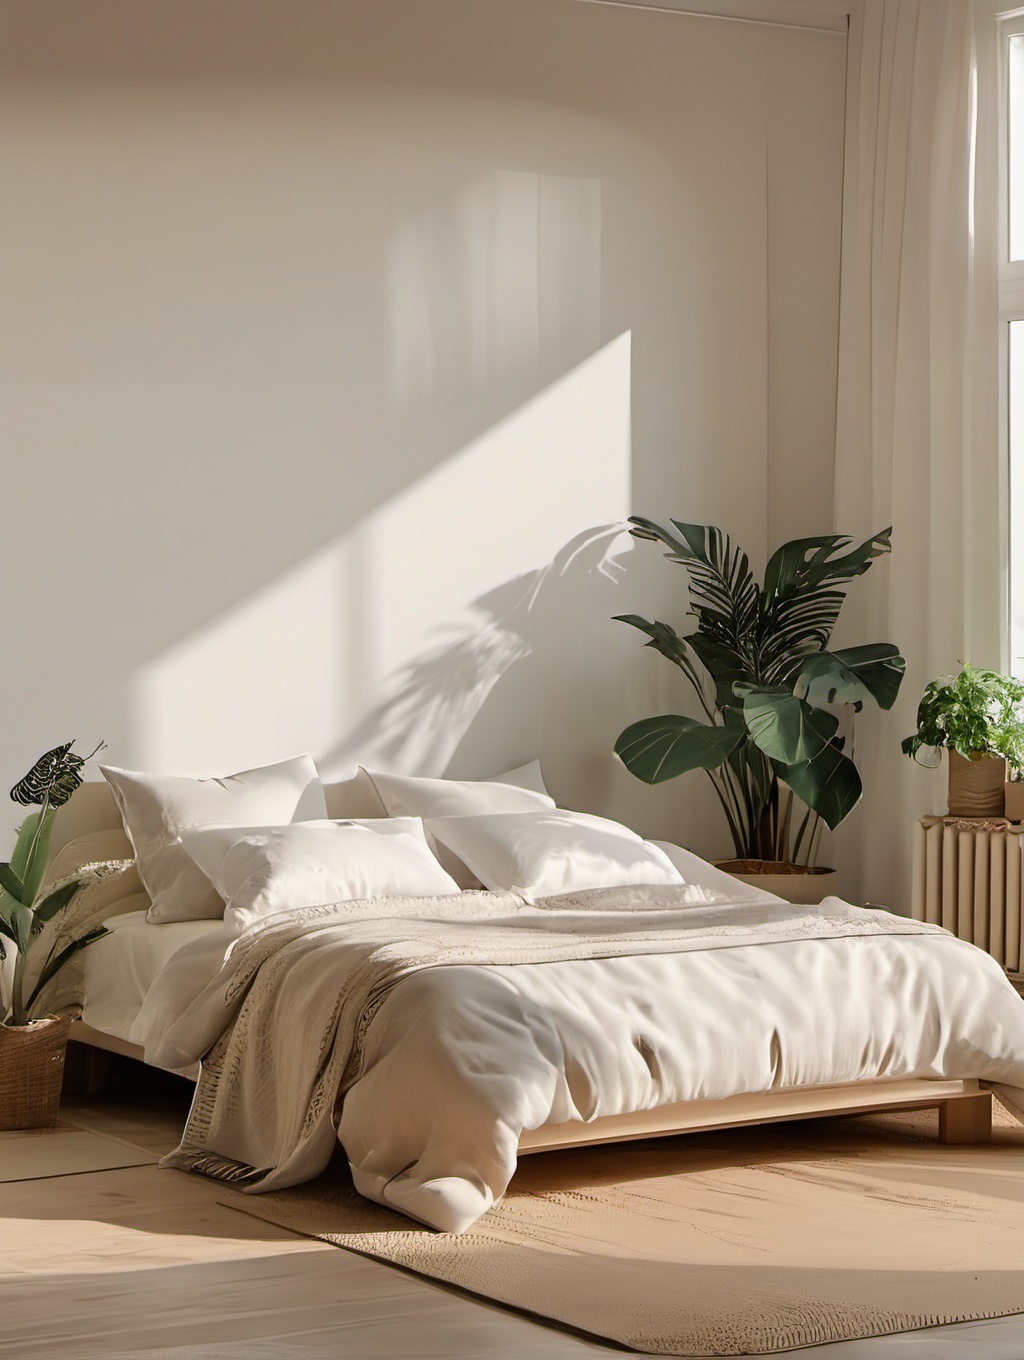 no humans,pillow,bed,plant,window,indoors,sunlight,wooden floor,curtains,shadow,lamp,bedroom,day,potted plant,